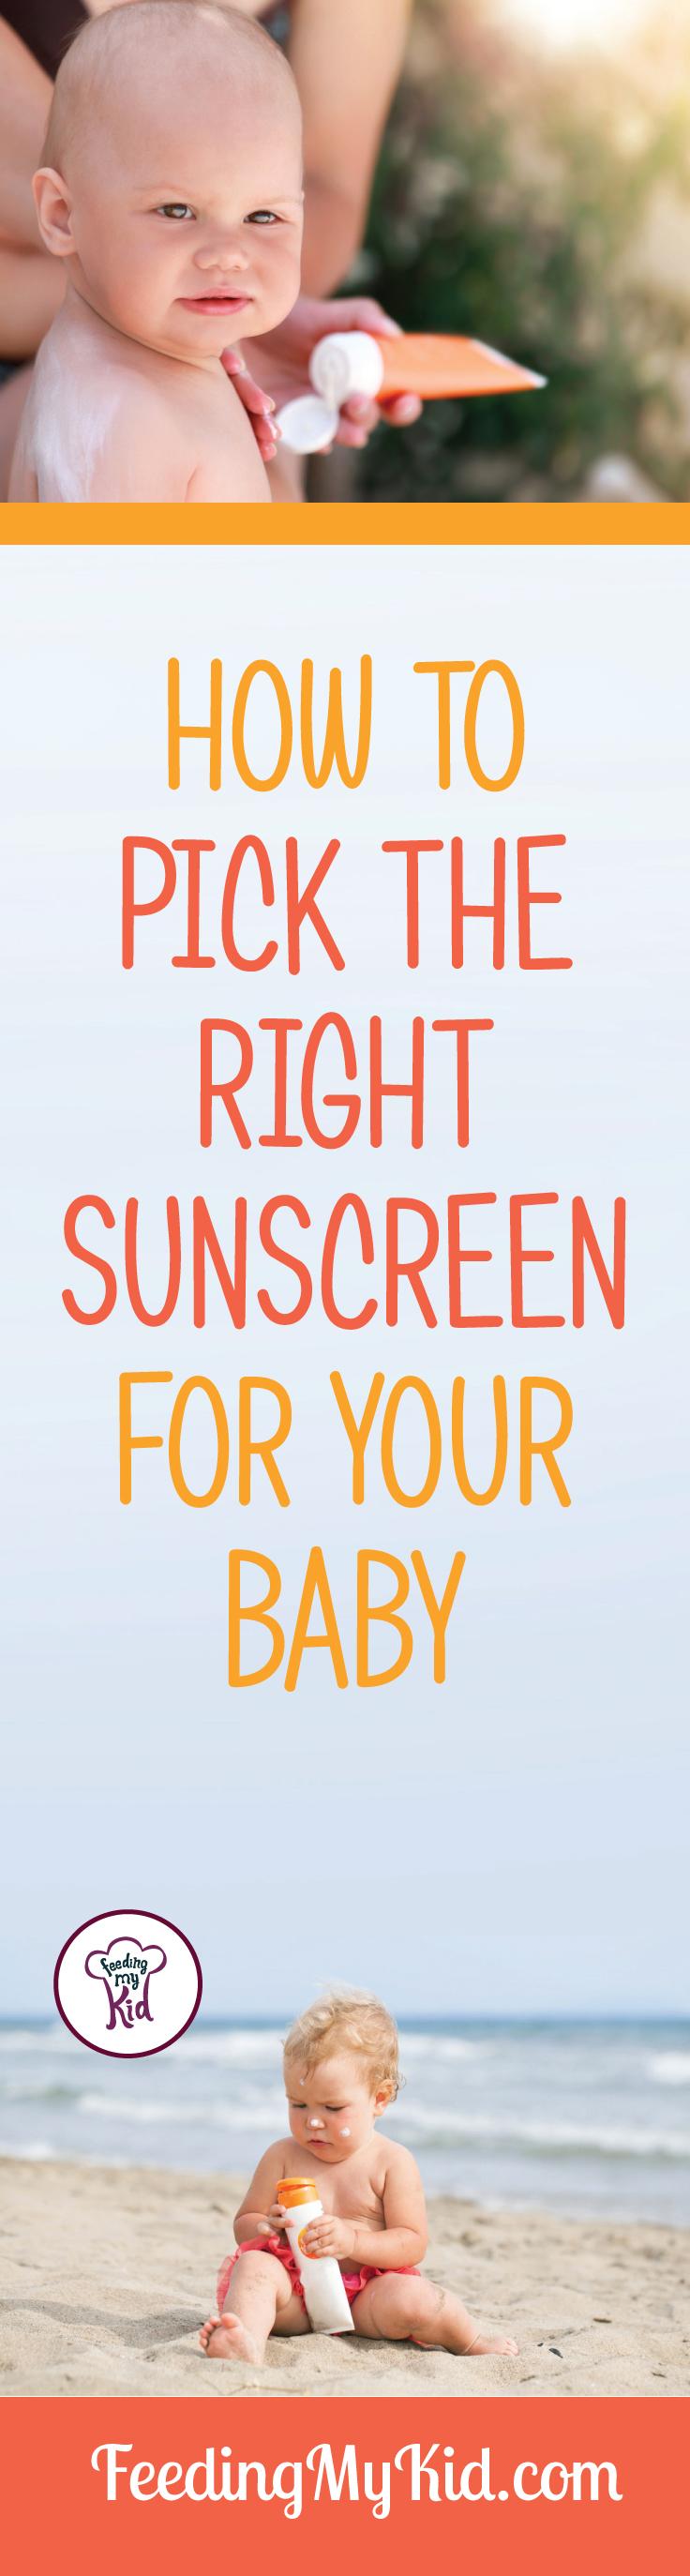 How To Pick The Right Sunscreen For Your Baby